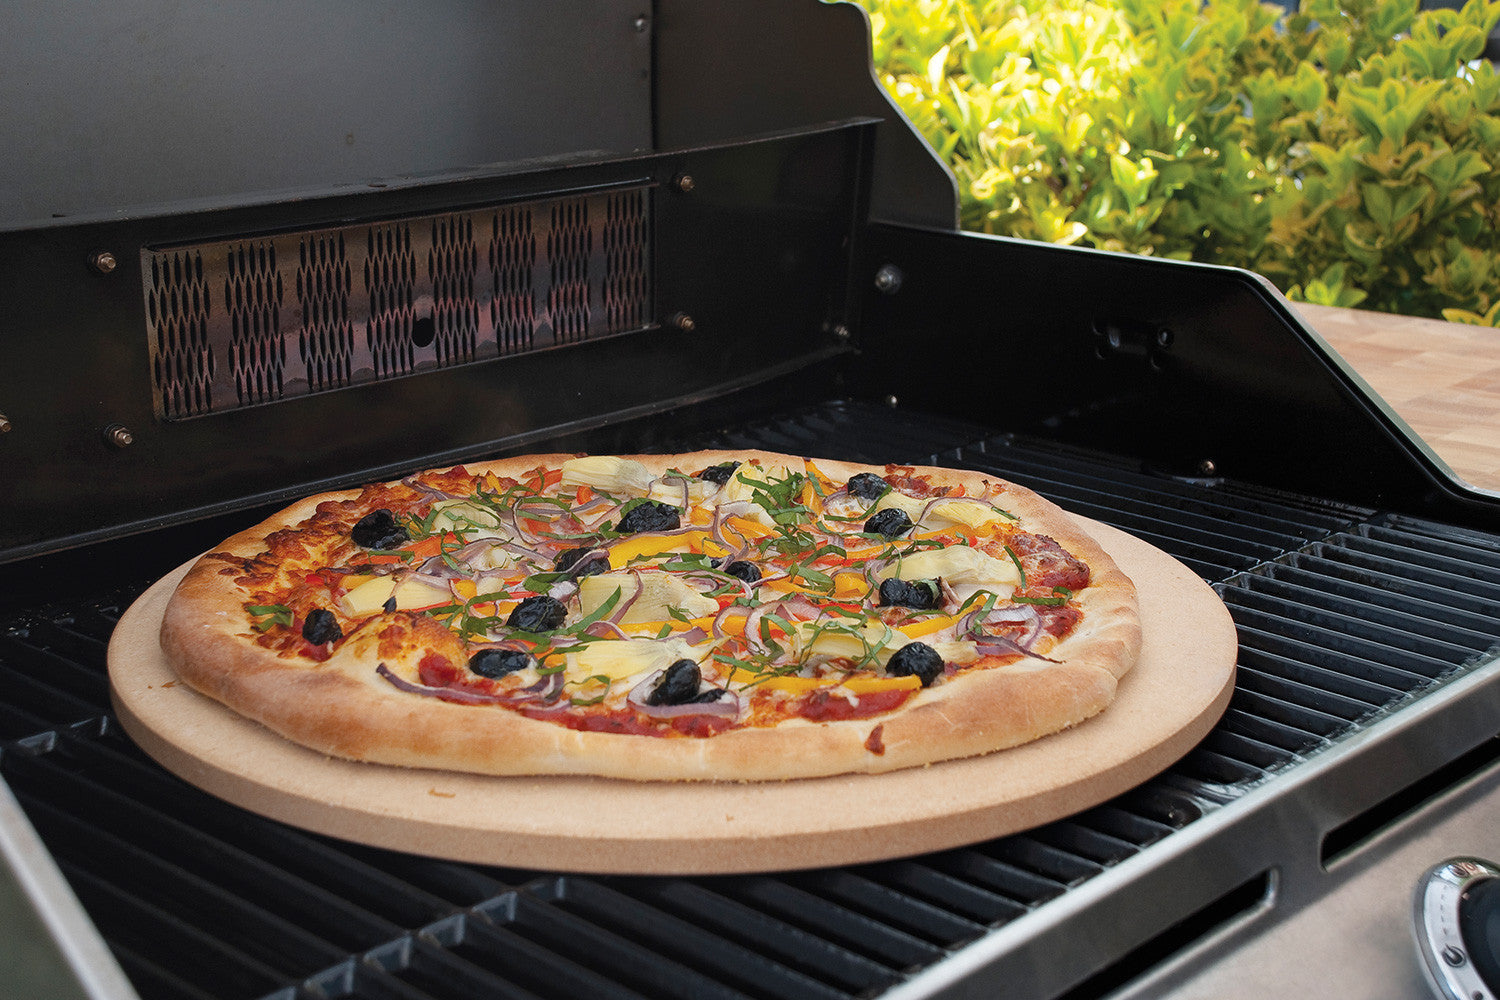 Pizza Cooking on the Grill with a 16.5" Cordierite Pizza Stone